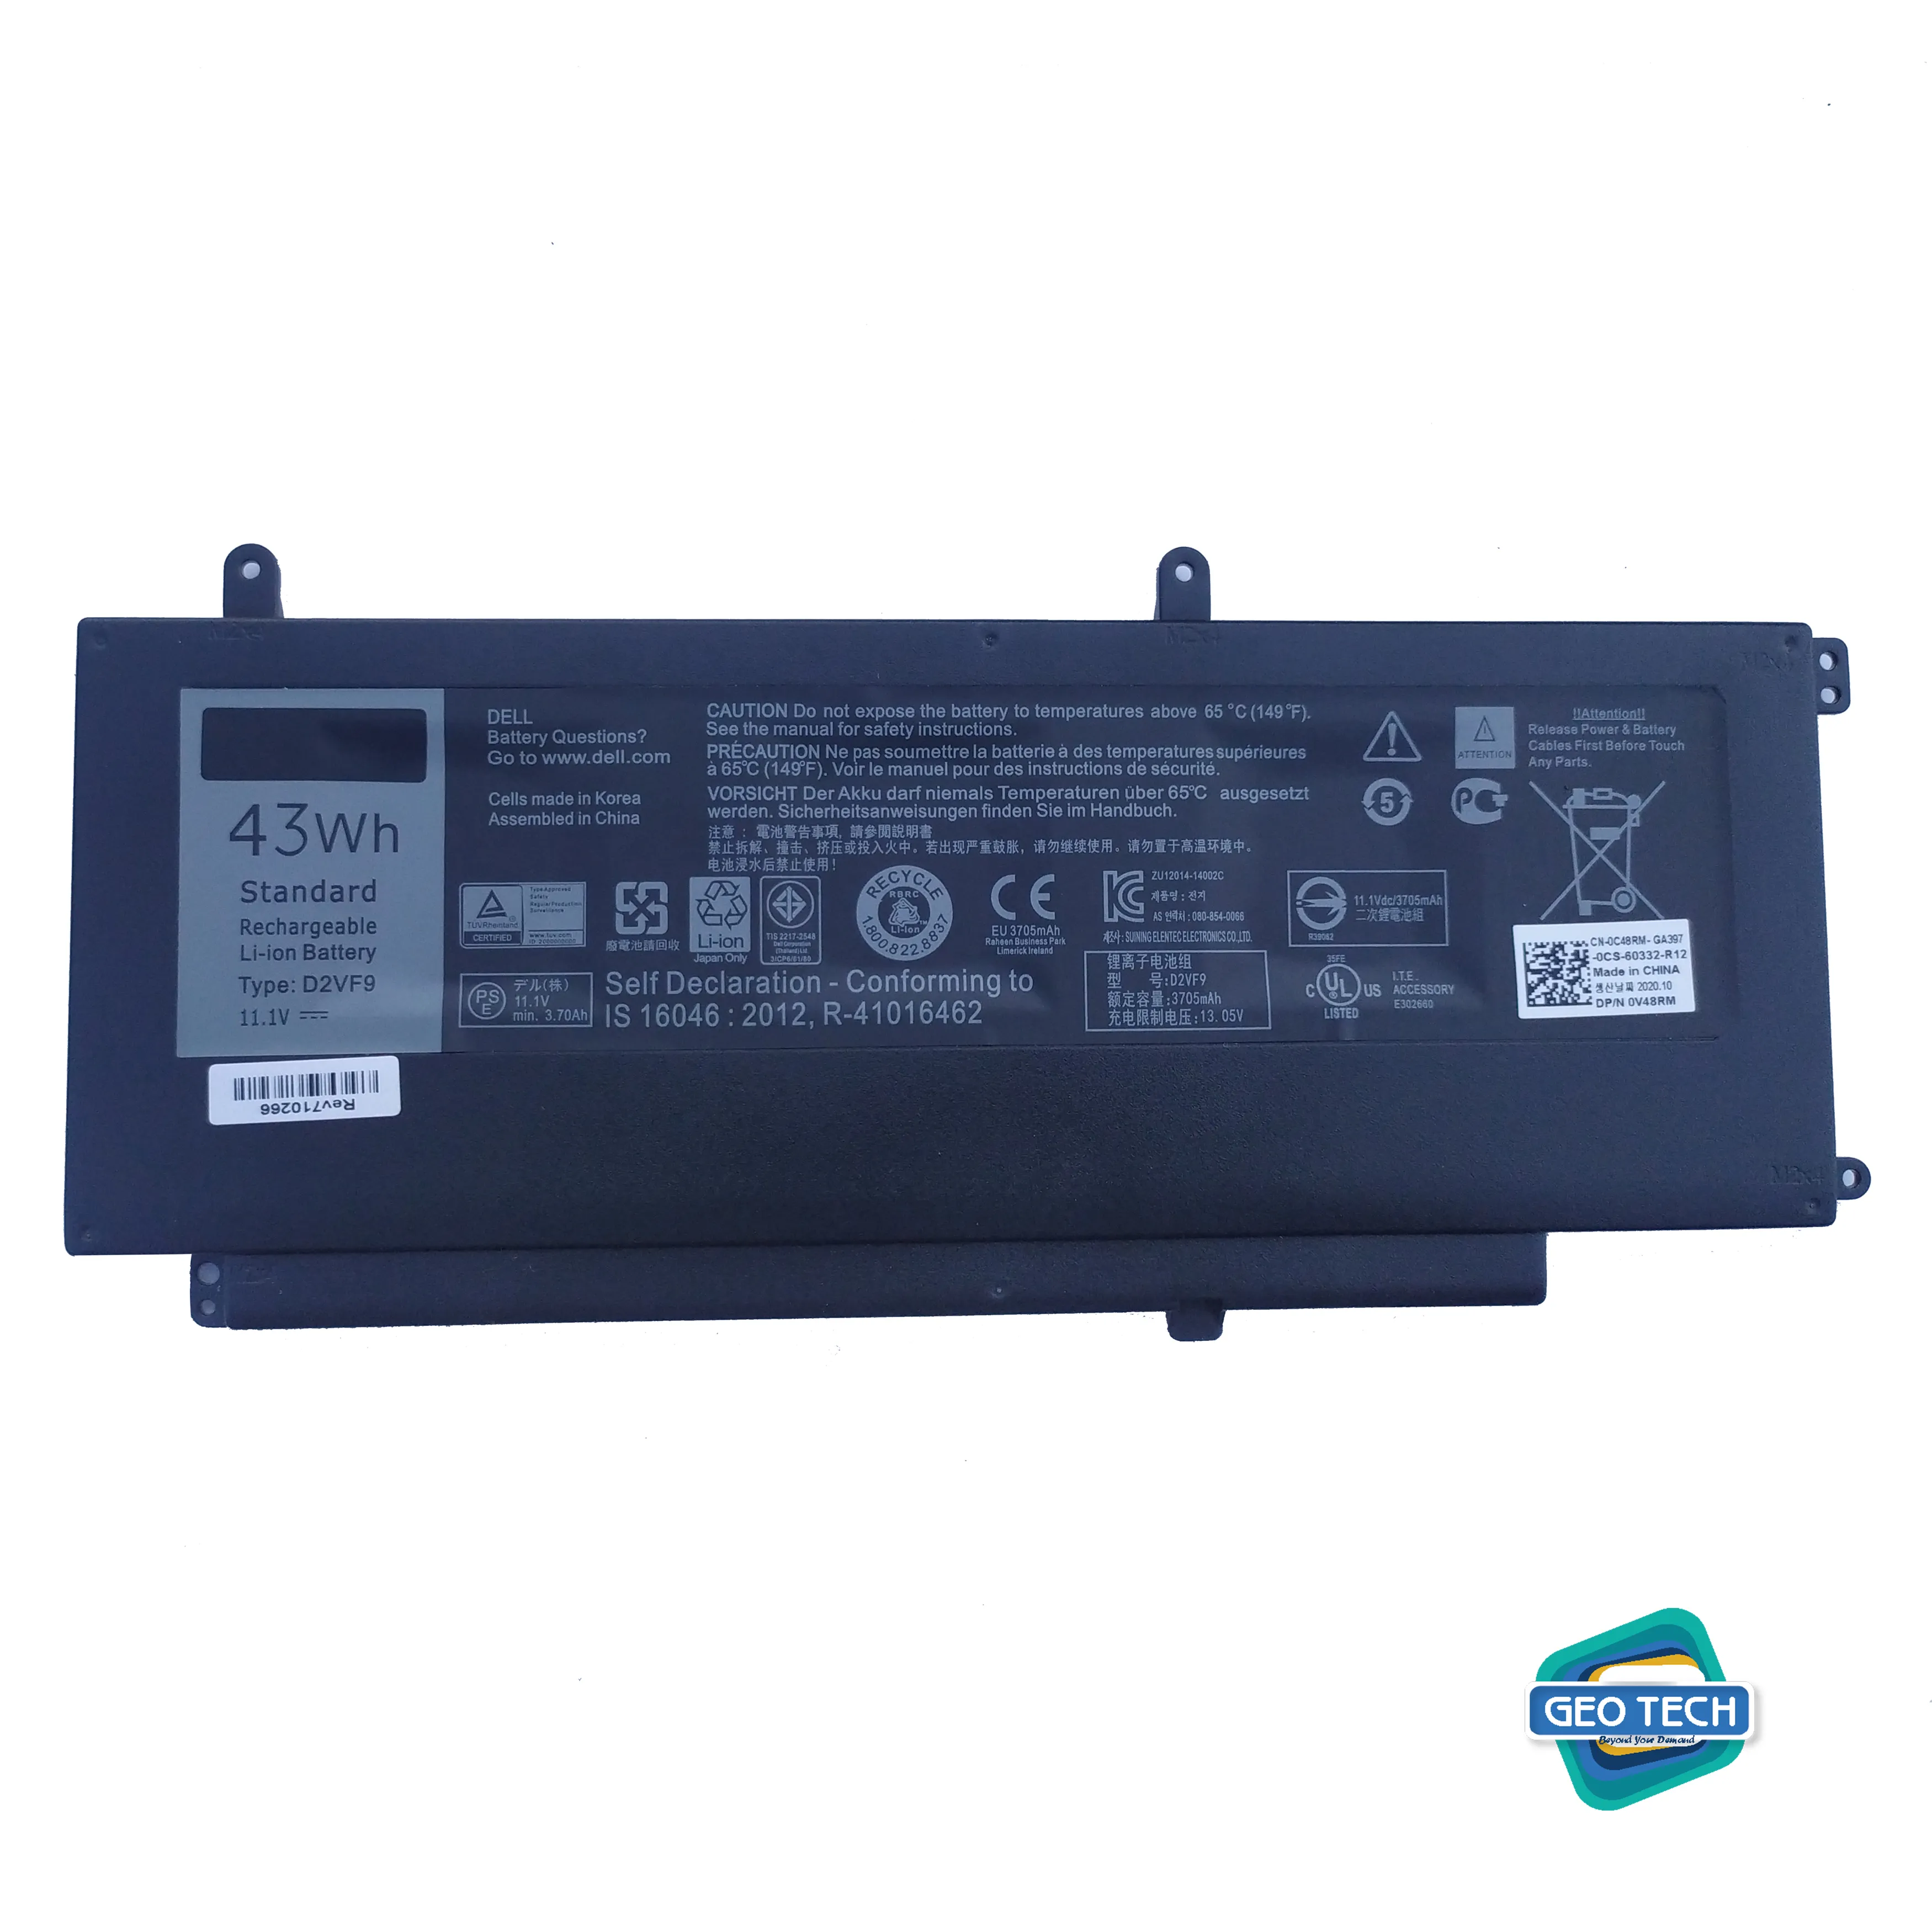 D2VF9 Battery 11.1V 43WH Replacement for Dell Inspiron 15 7547 7548 0PXR51 PXR51